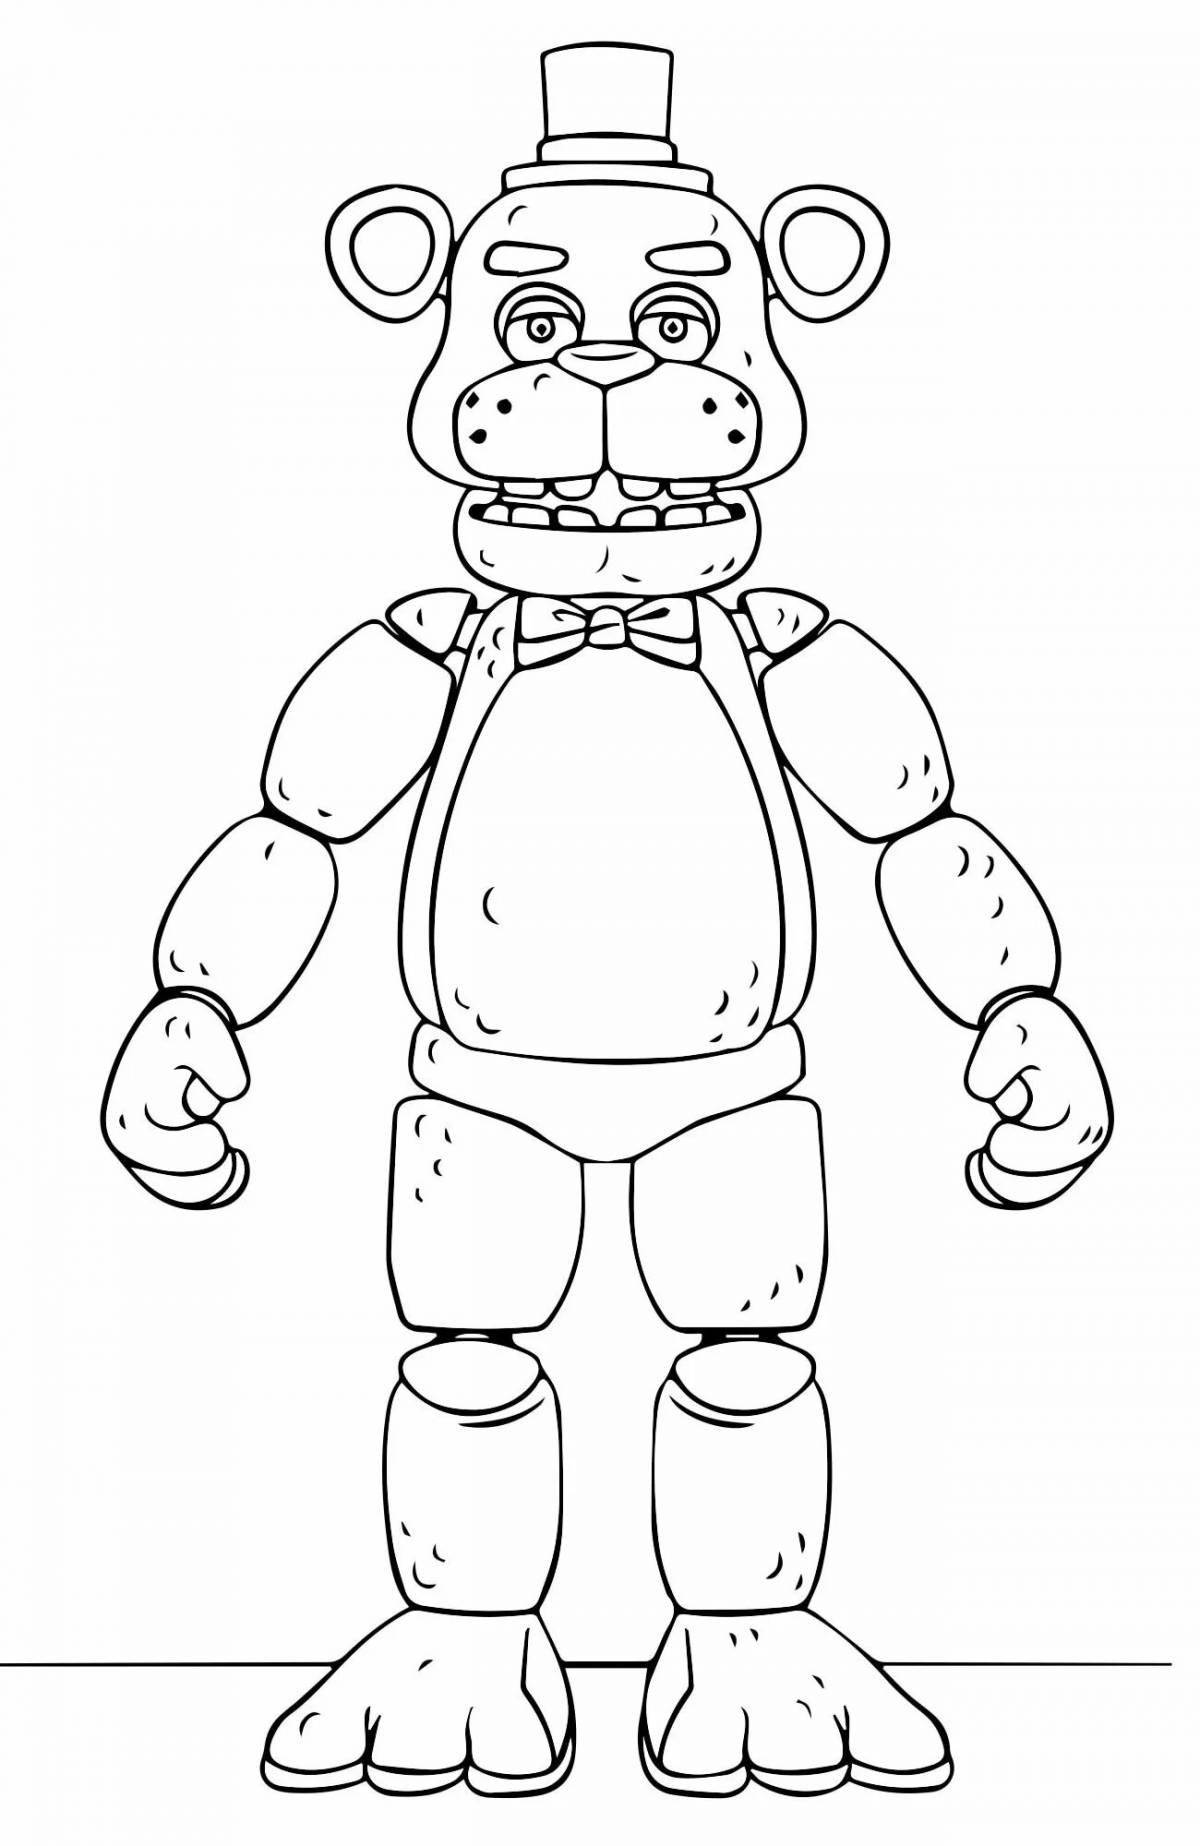 Golden freddy's funny coloring book